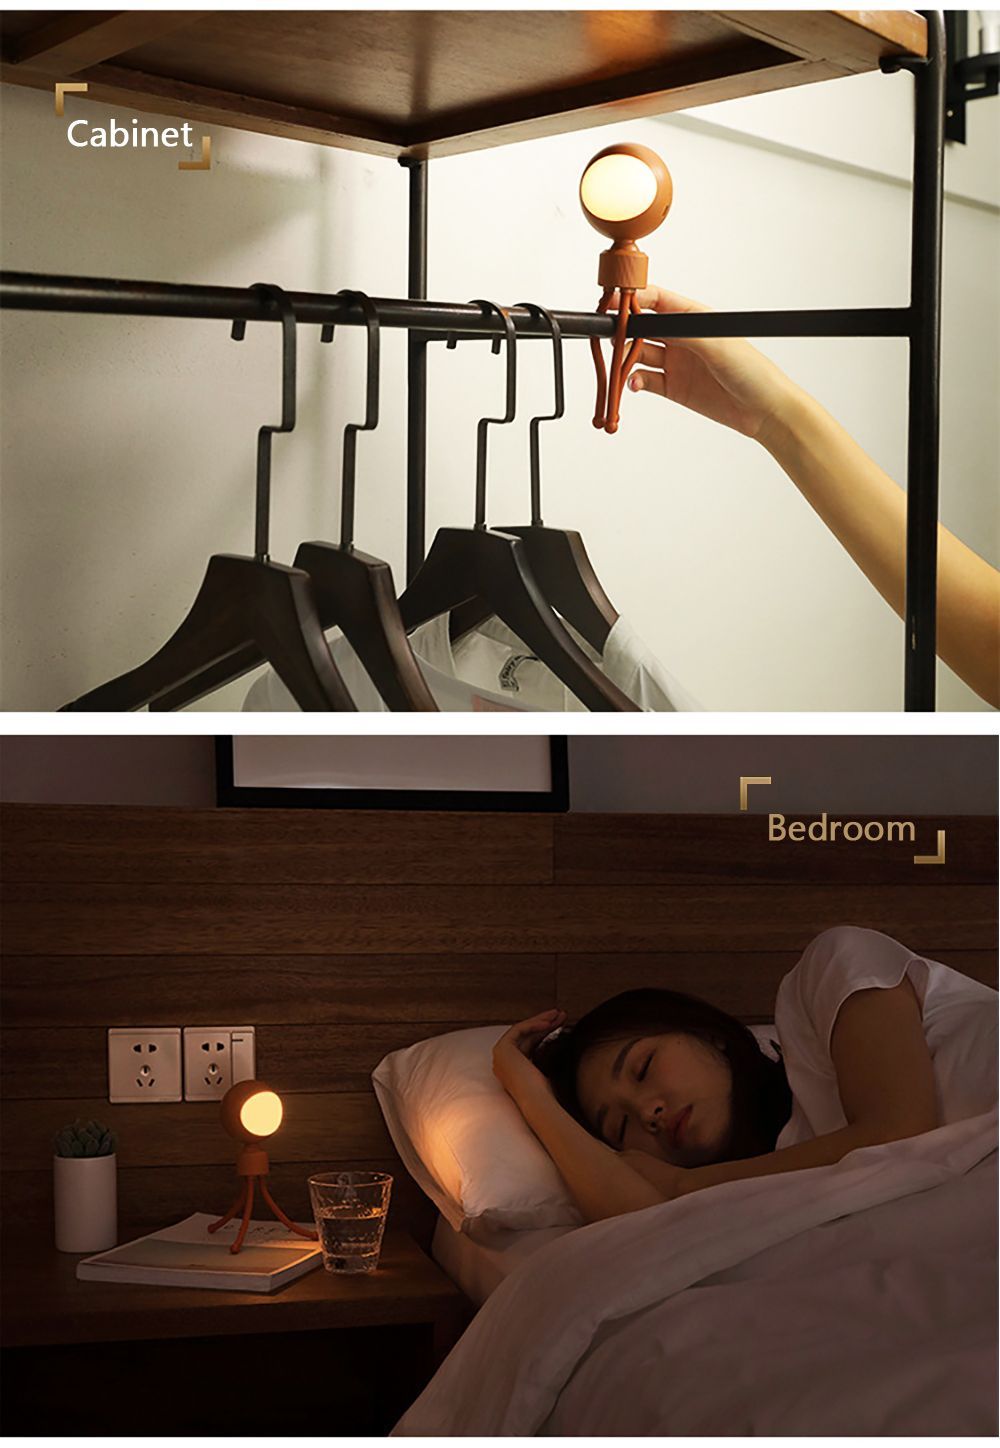 Timing-Adjustable-Voice-Control-USB-LED-Touch-Night-Lights-Mobile-Phone-Bracket-For-Home-Wardrobe-St-1690451